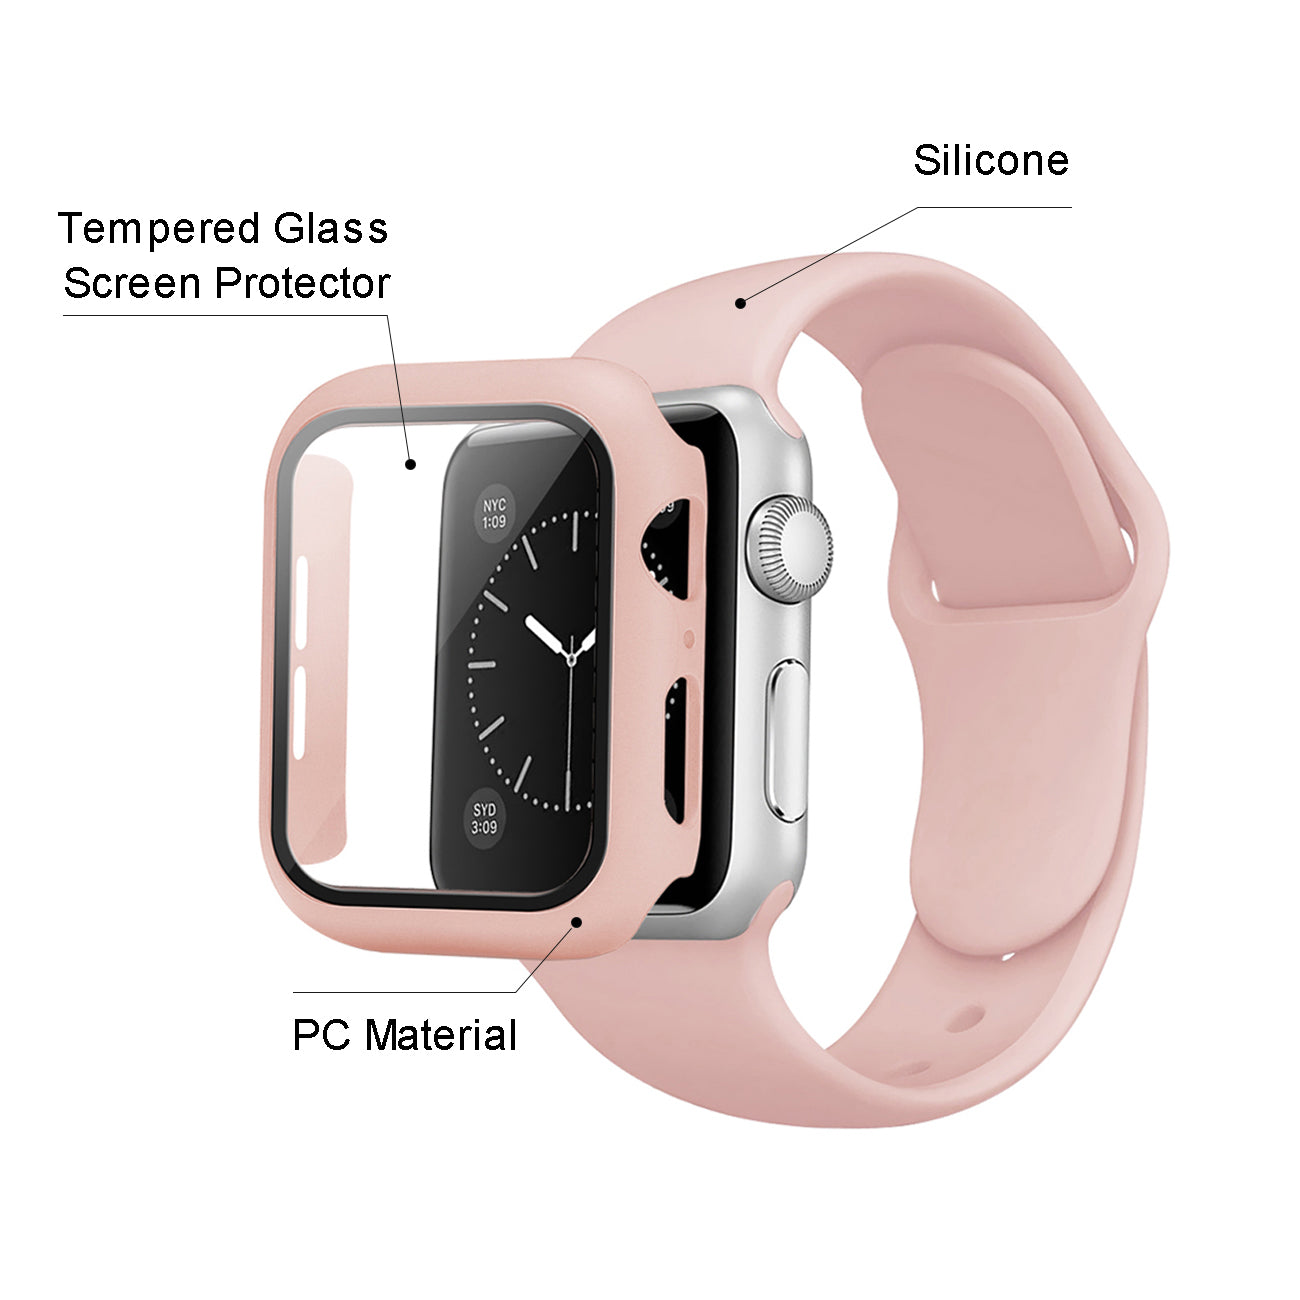 Watch Case PC With Glass Screen Protector, Silicone Watch Band Apple Watch 44mm Pink Color